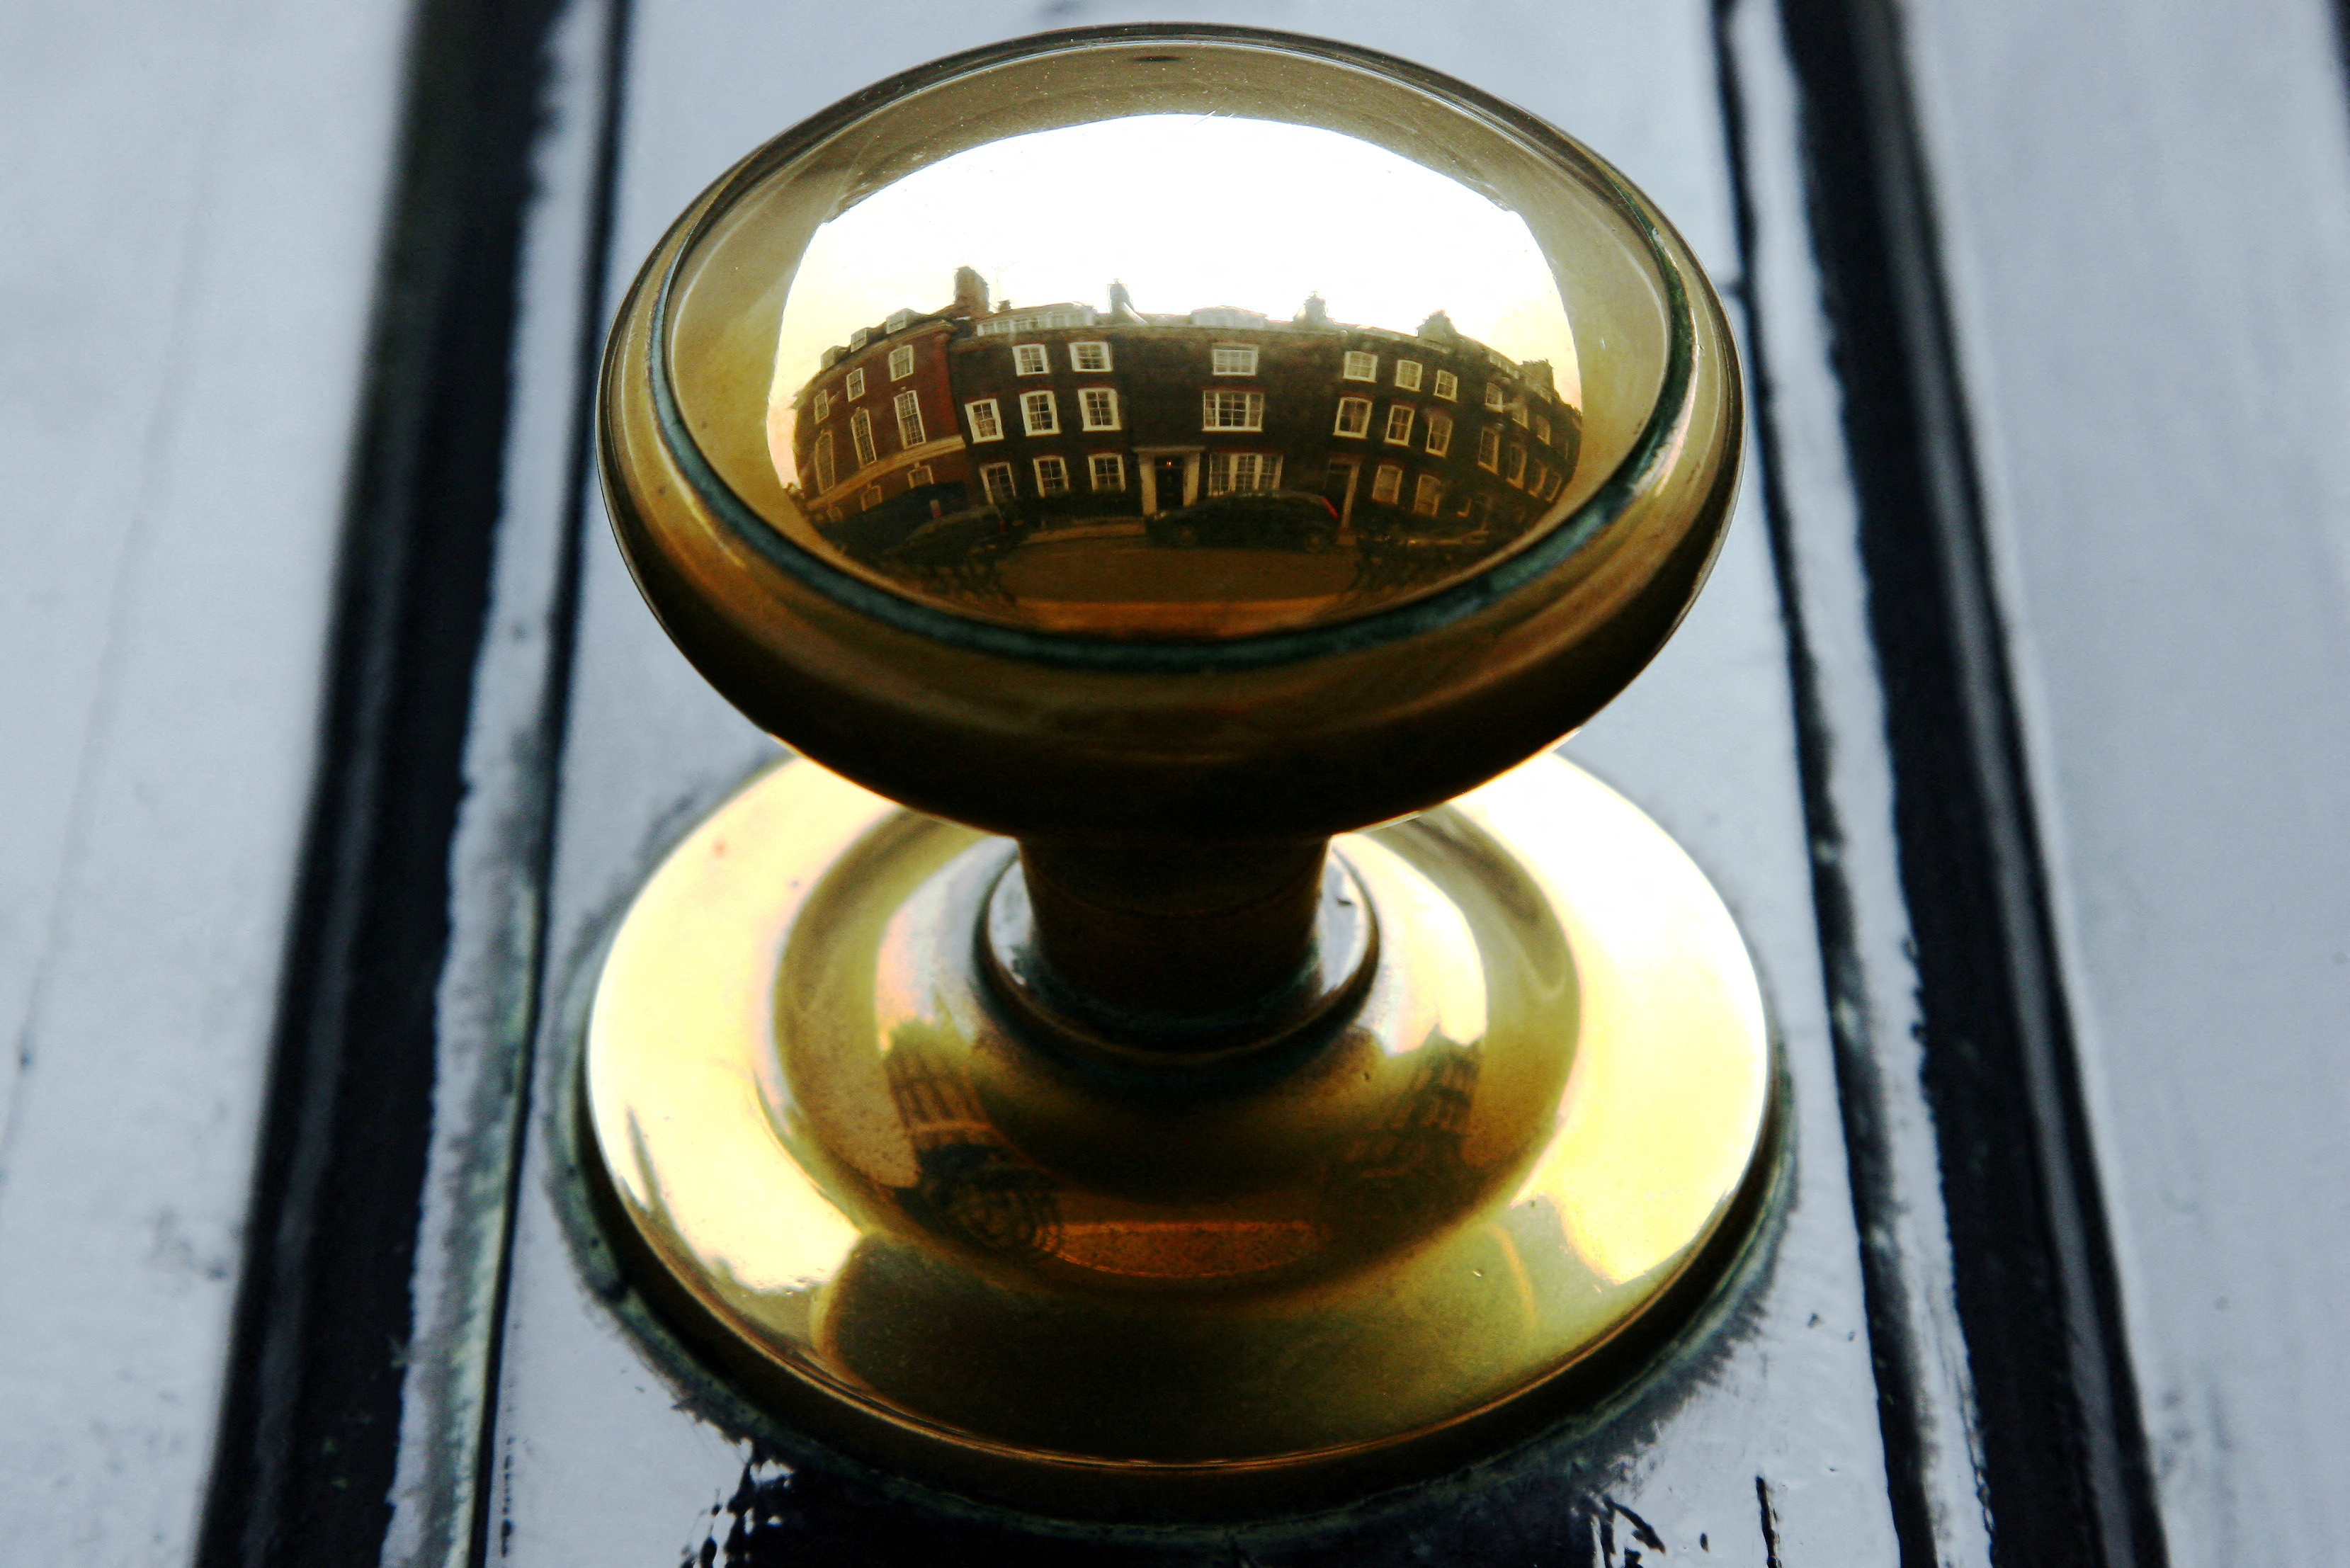 Houses are reflected in the door handle of a property in central London